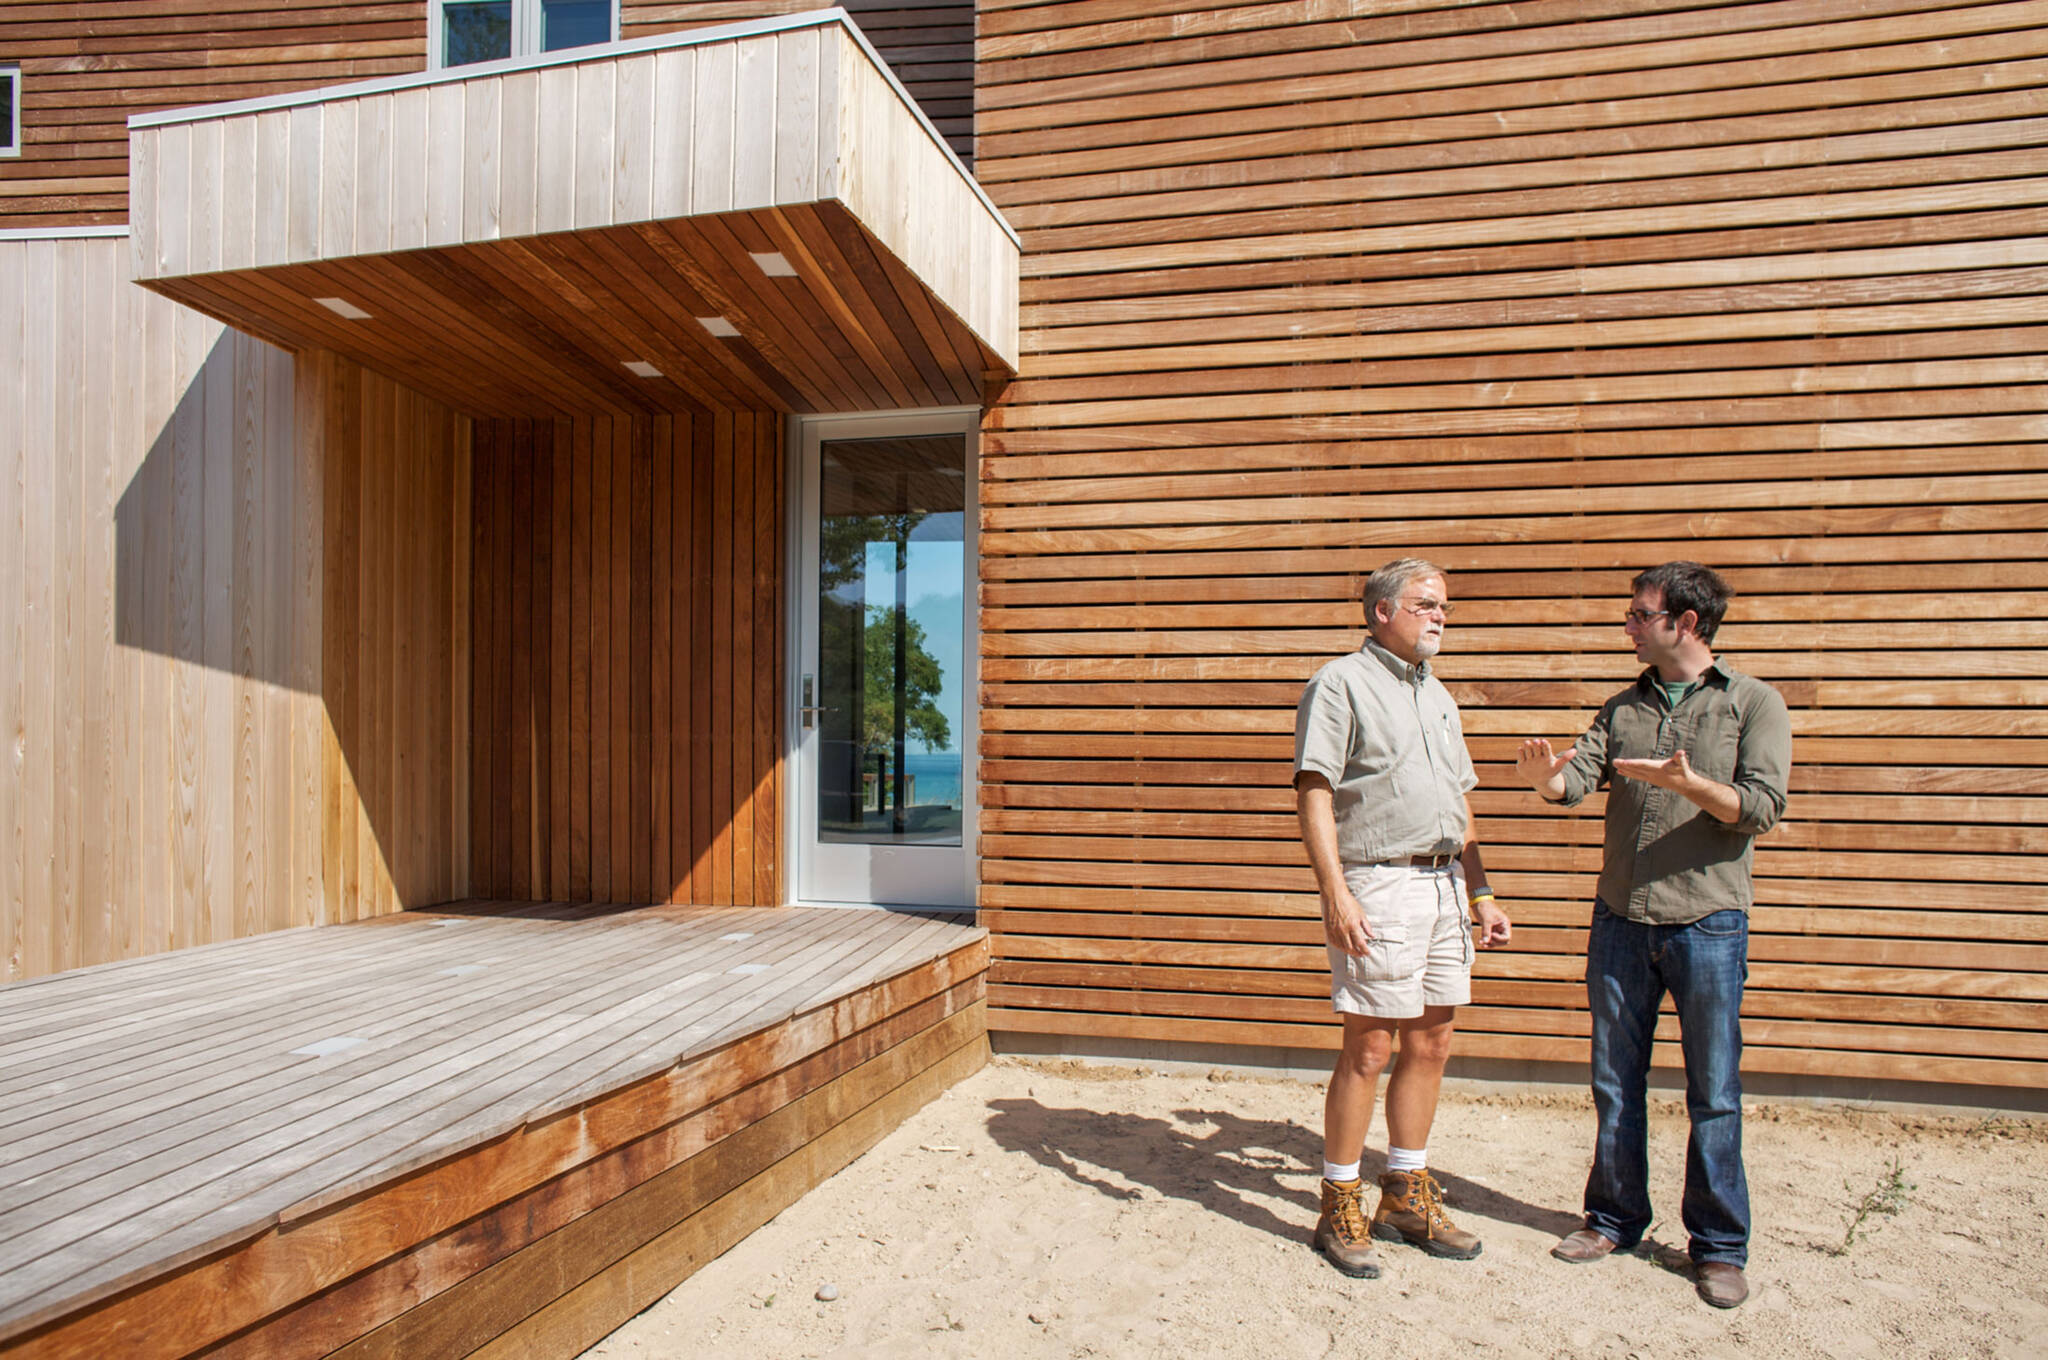 Human scale on the front door of the sustainable lake house project in Omena, Michigan designed by the architecture studio Danny Forster & Architecture